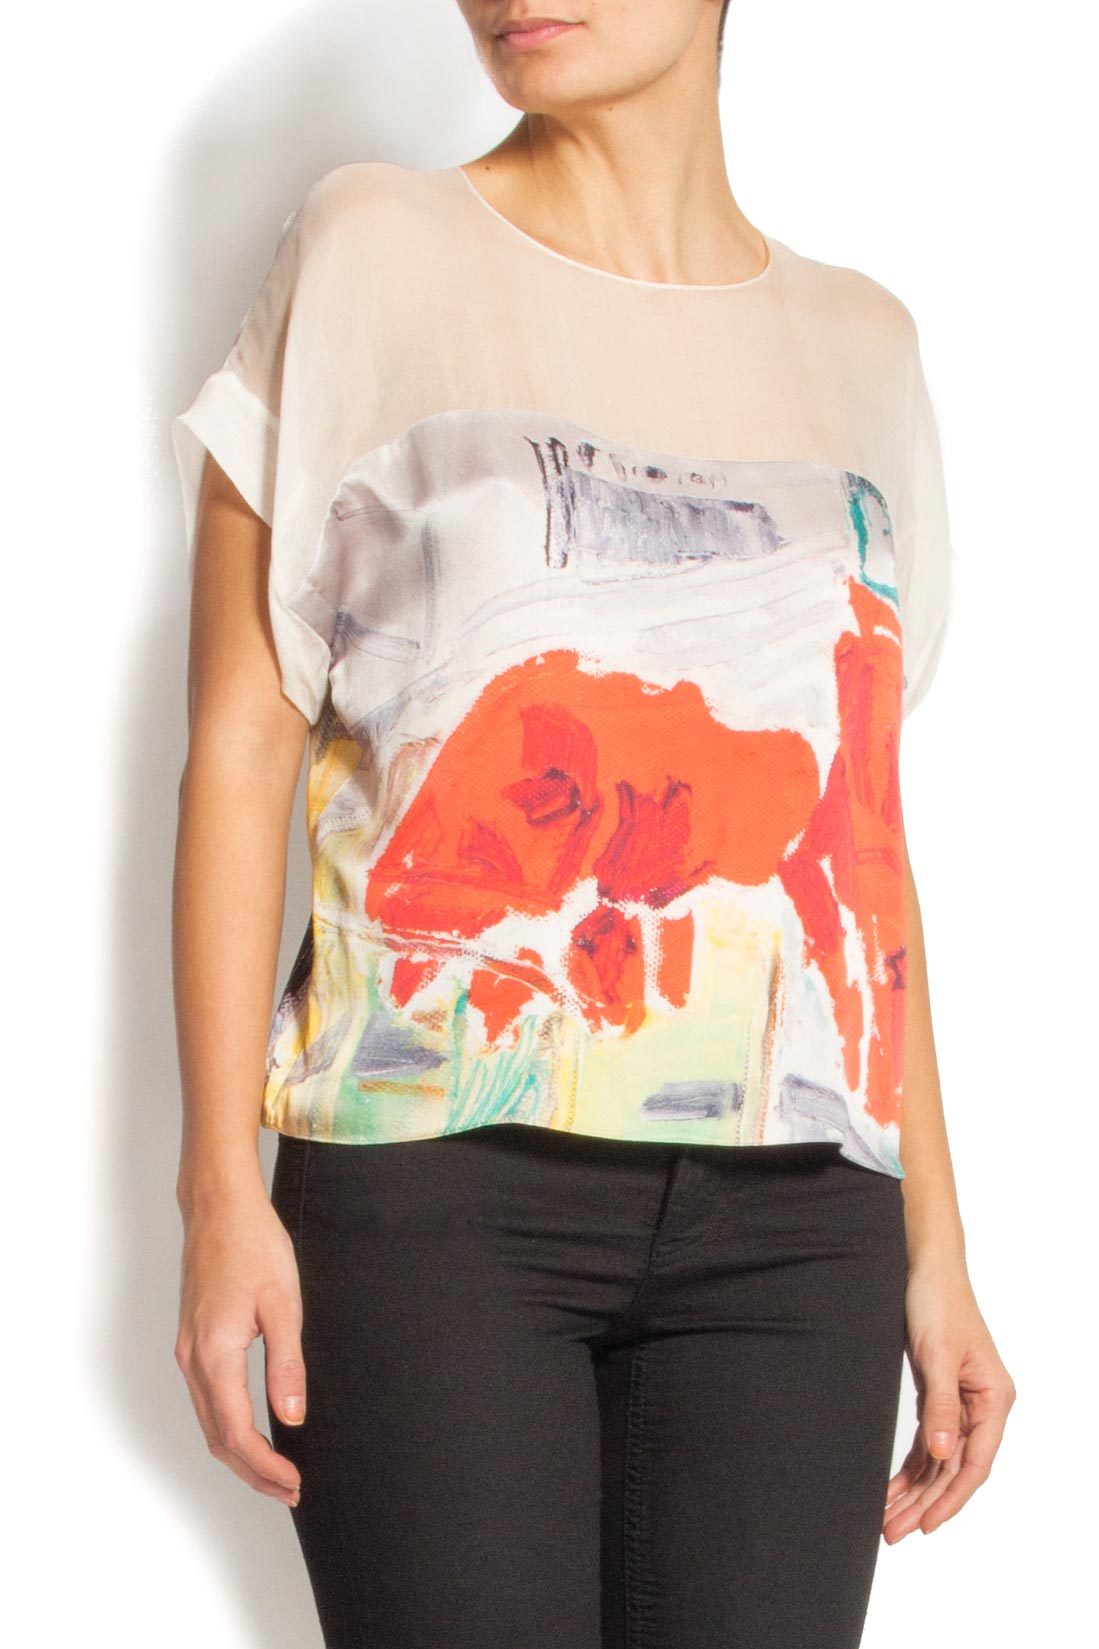 Floral-print silk top Argo by Andreea Buga image 1